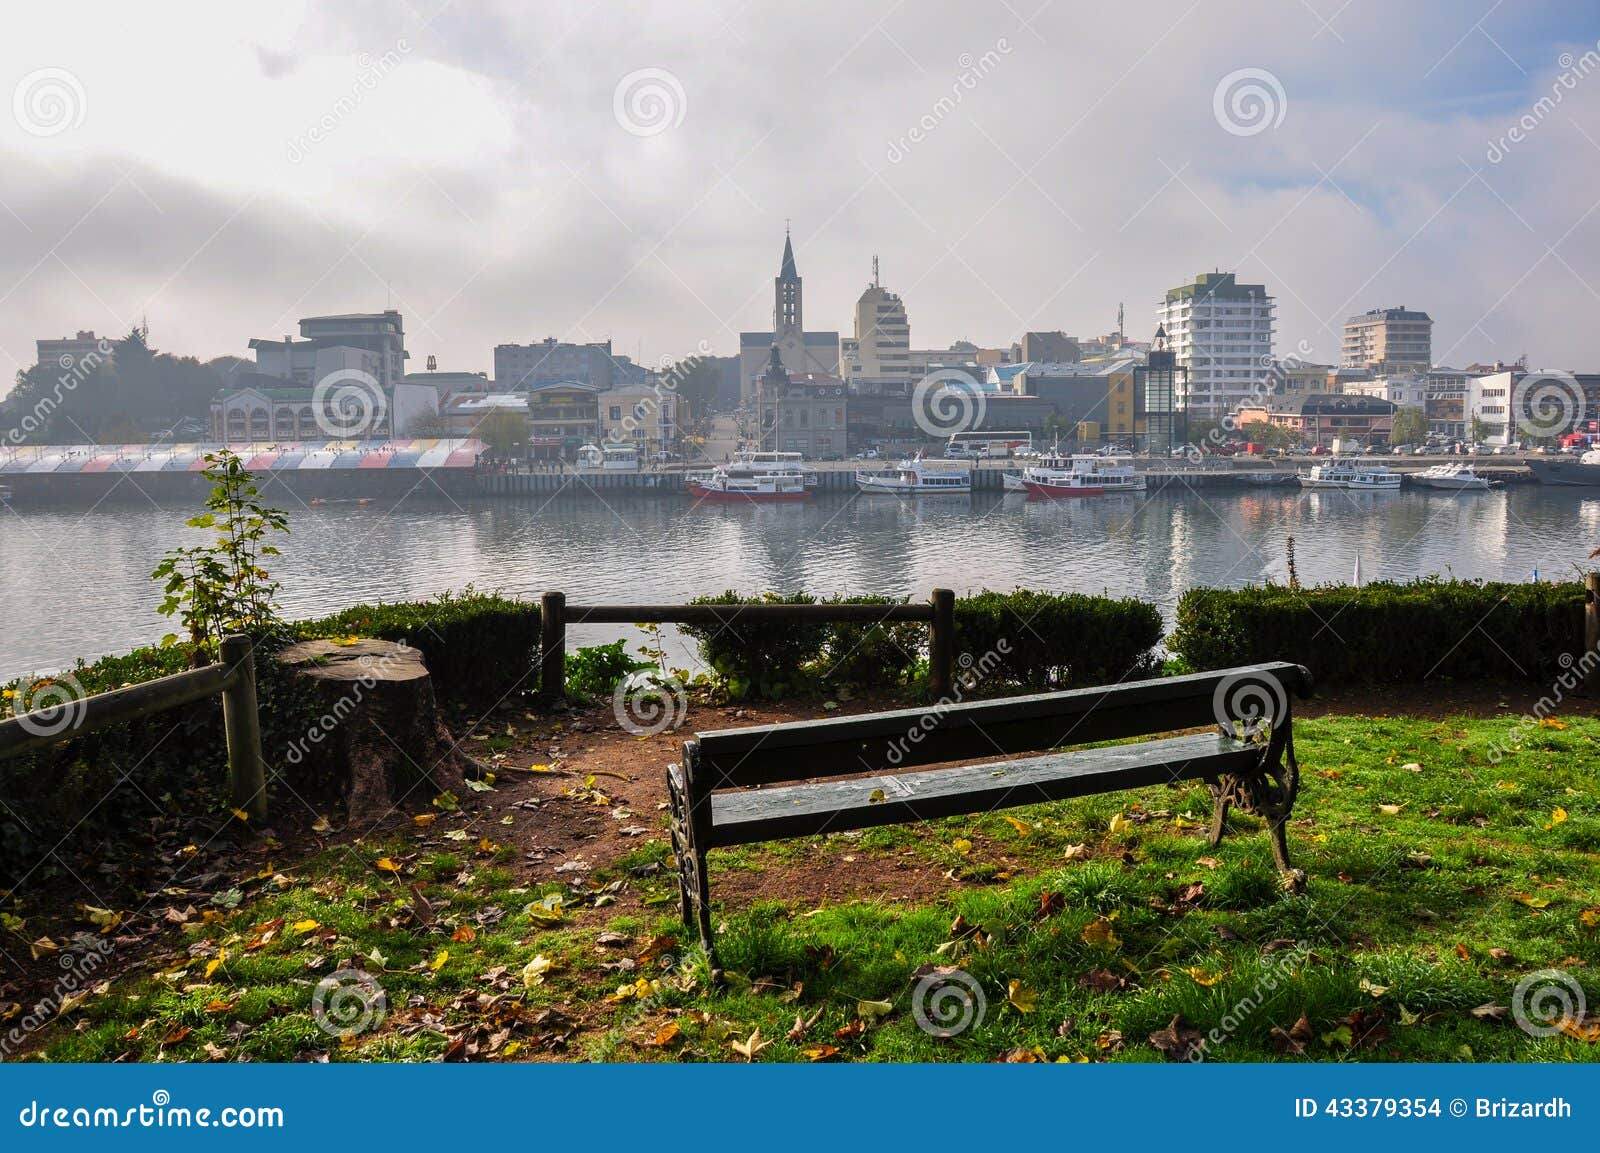 beautiful view over valdivia from the other side of the river, c